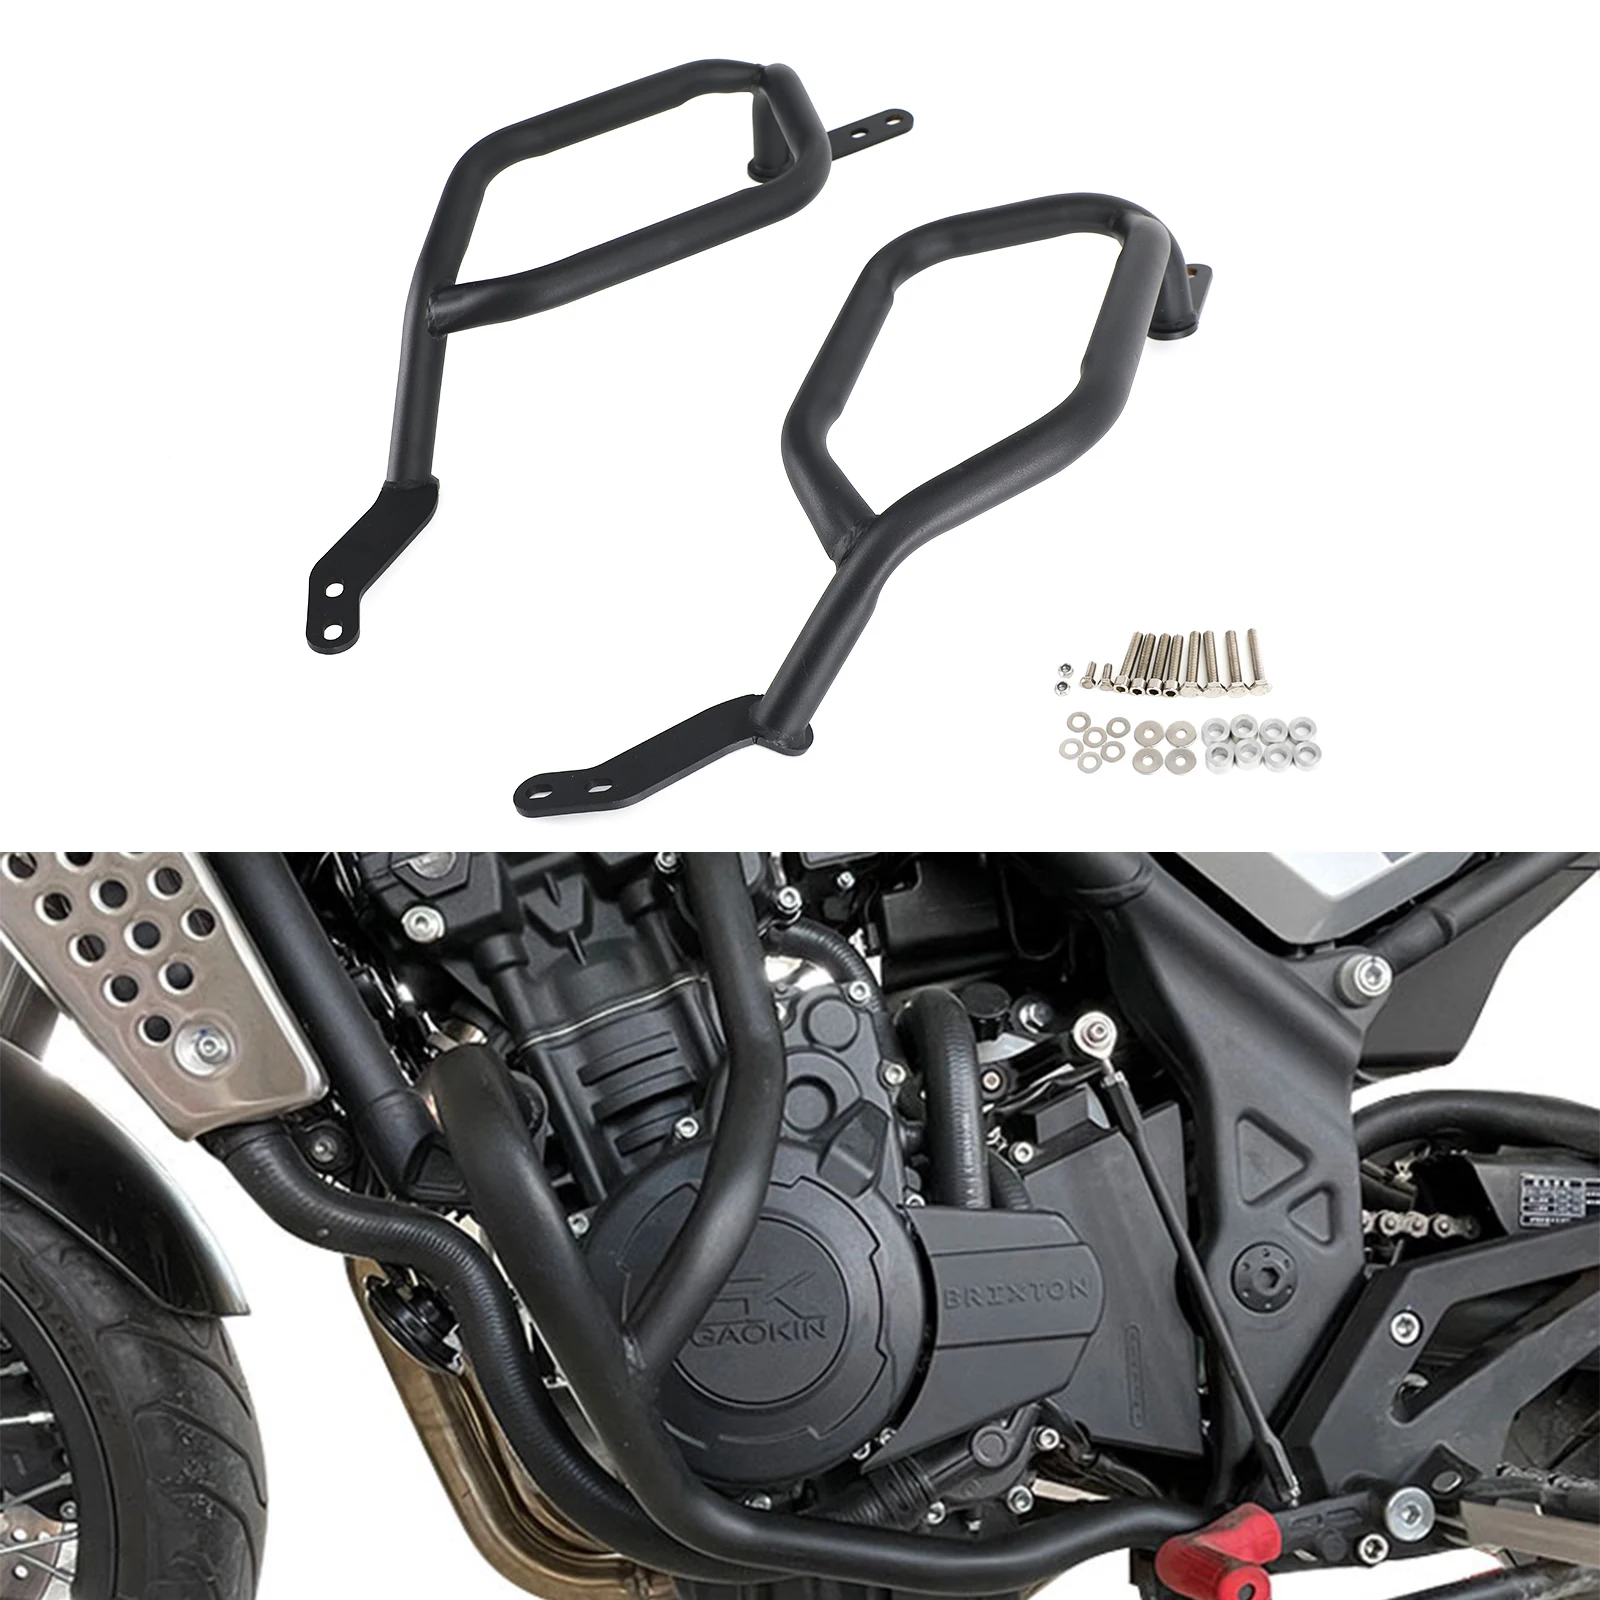 

Areyourshop Lower Crash Bars Engine Guards Fit For For Yamaha Tenere 700 Xtz700 2019 2020 2021 Motorcycle Parts